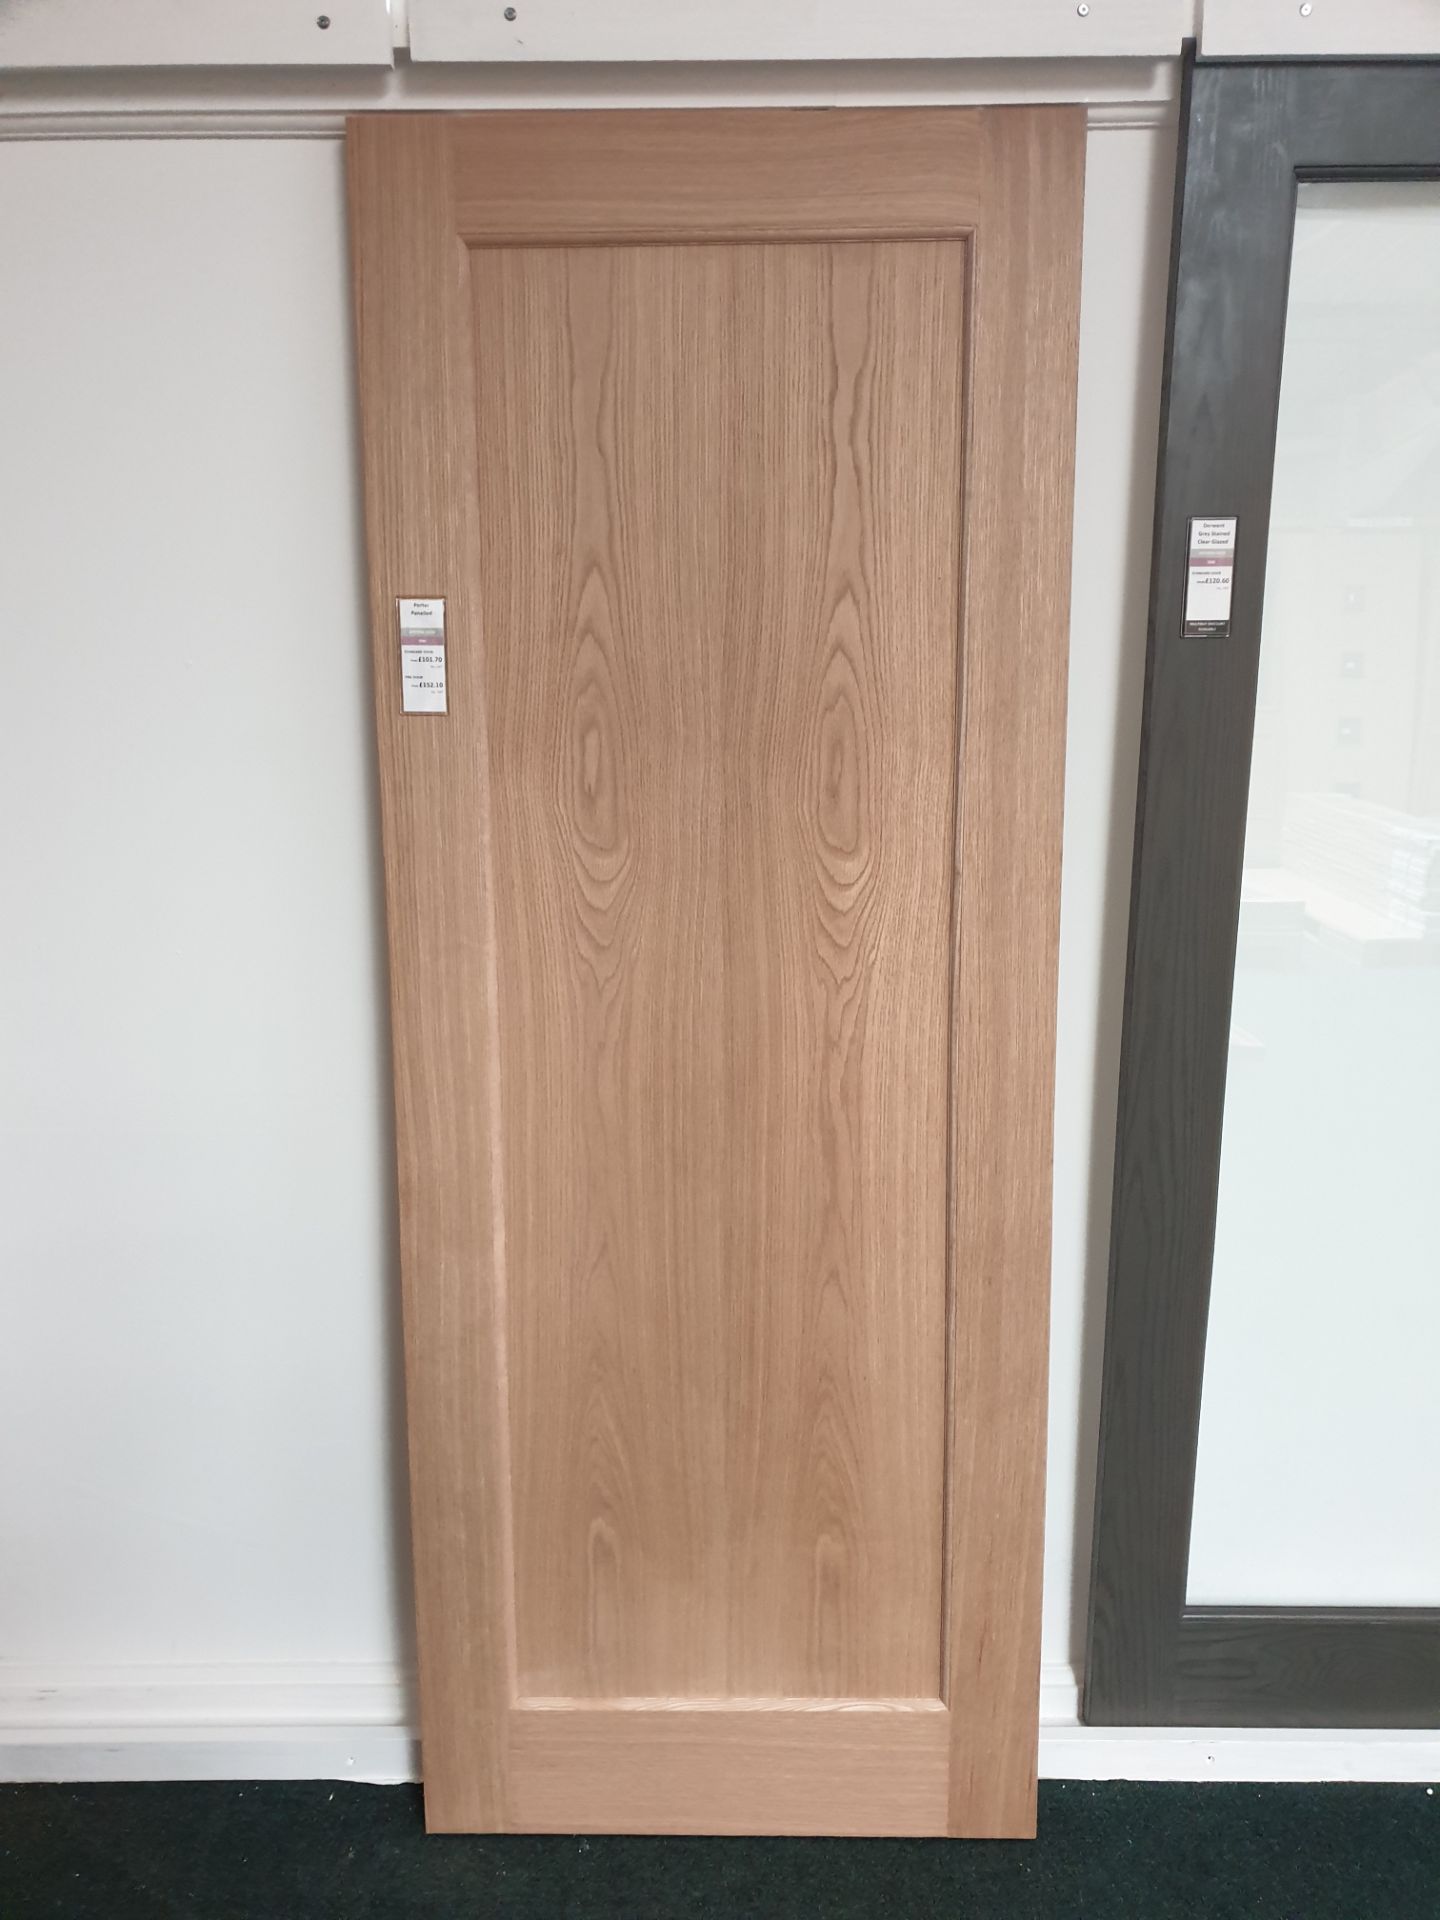 5 x Porter Flat Panel Internal Fire Door AWOPORT33FD 78”x33”x44mm - Lots to be handed out in order